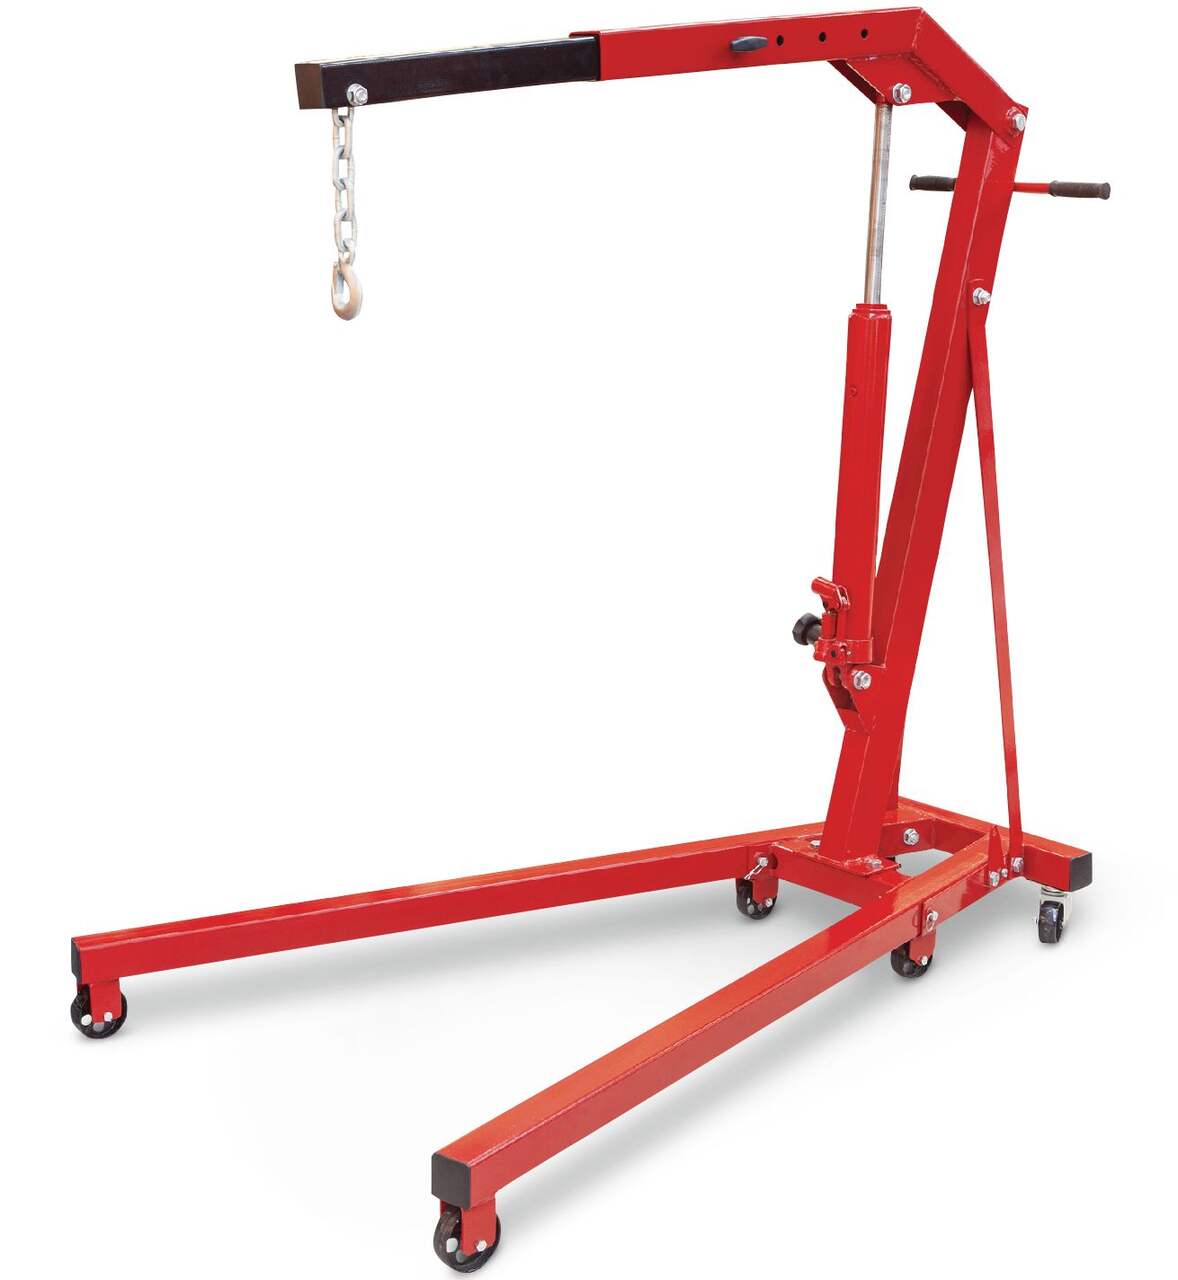 https://media-www.canadiantire.ca/product/automotive/auto-maintenance/auto-shop-equipment-supplies/0090260/big-red-shop-crane-1-ton-04042b26-c7ef-4cf6-80bf-11195828a7d2-jpgrendition.jpg?imdensity=1&imwidth=1244&impolicy=mZoom